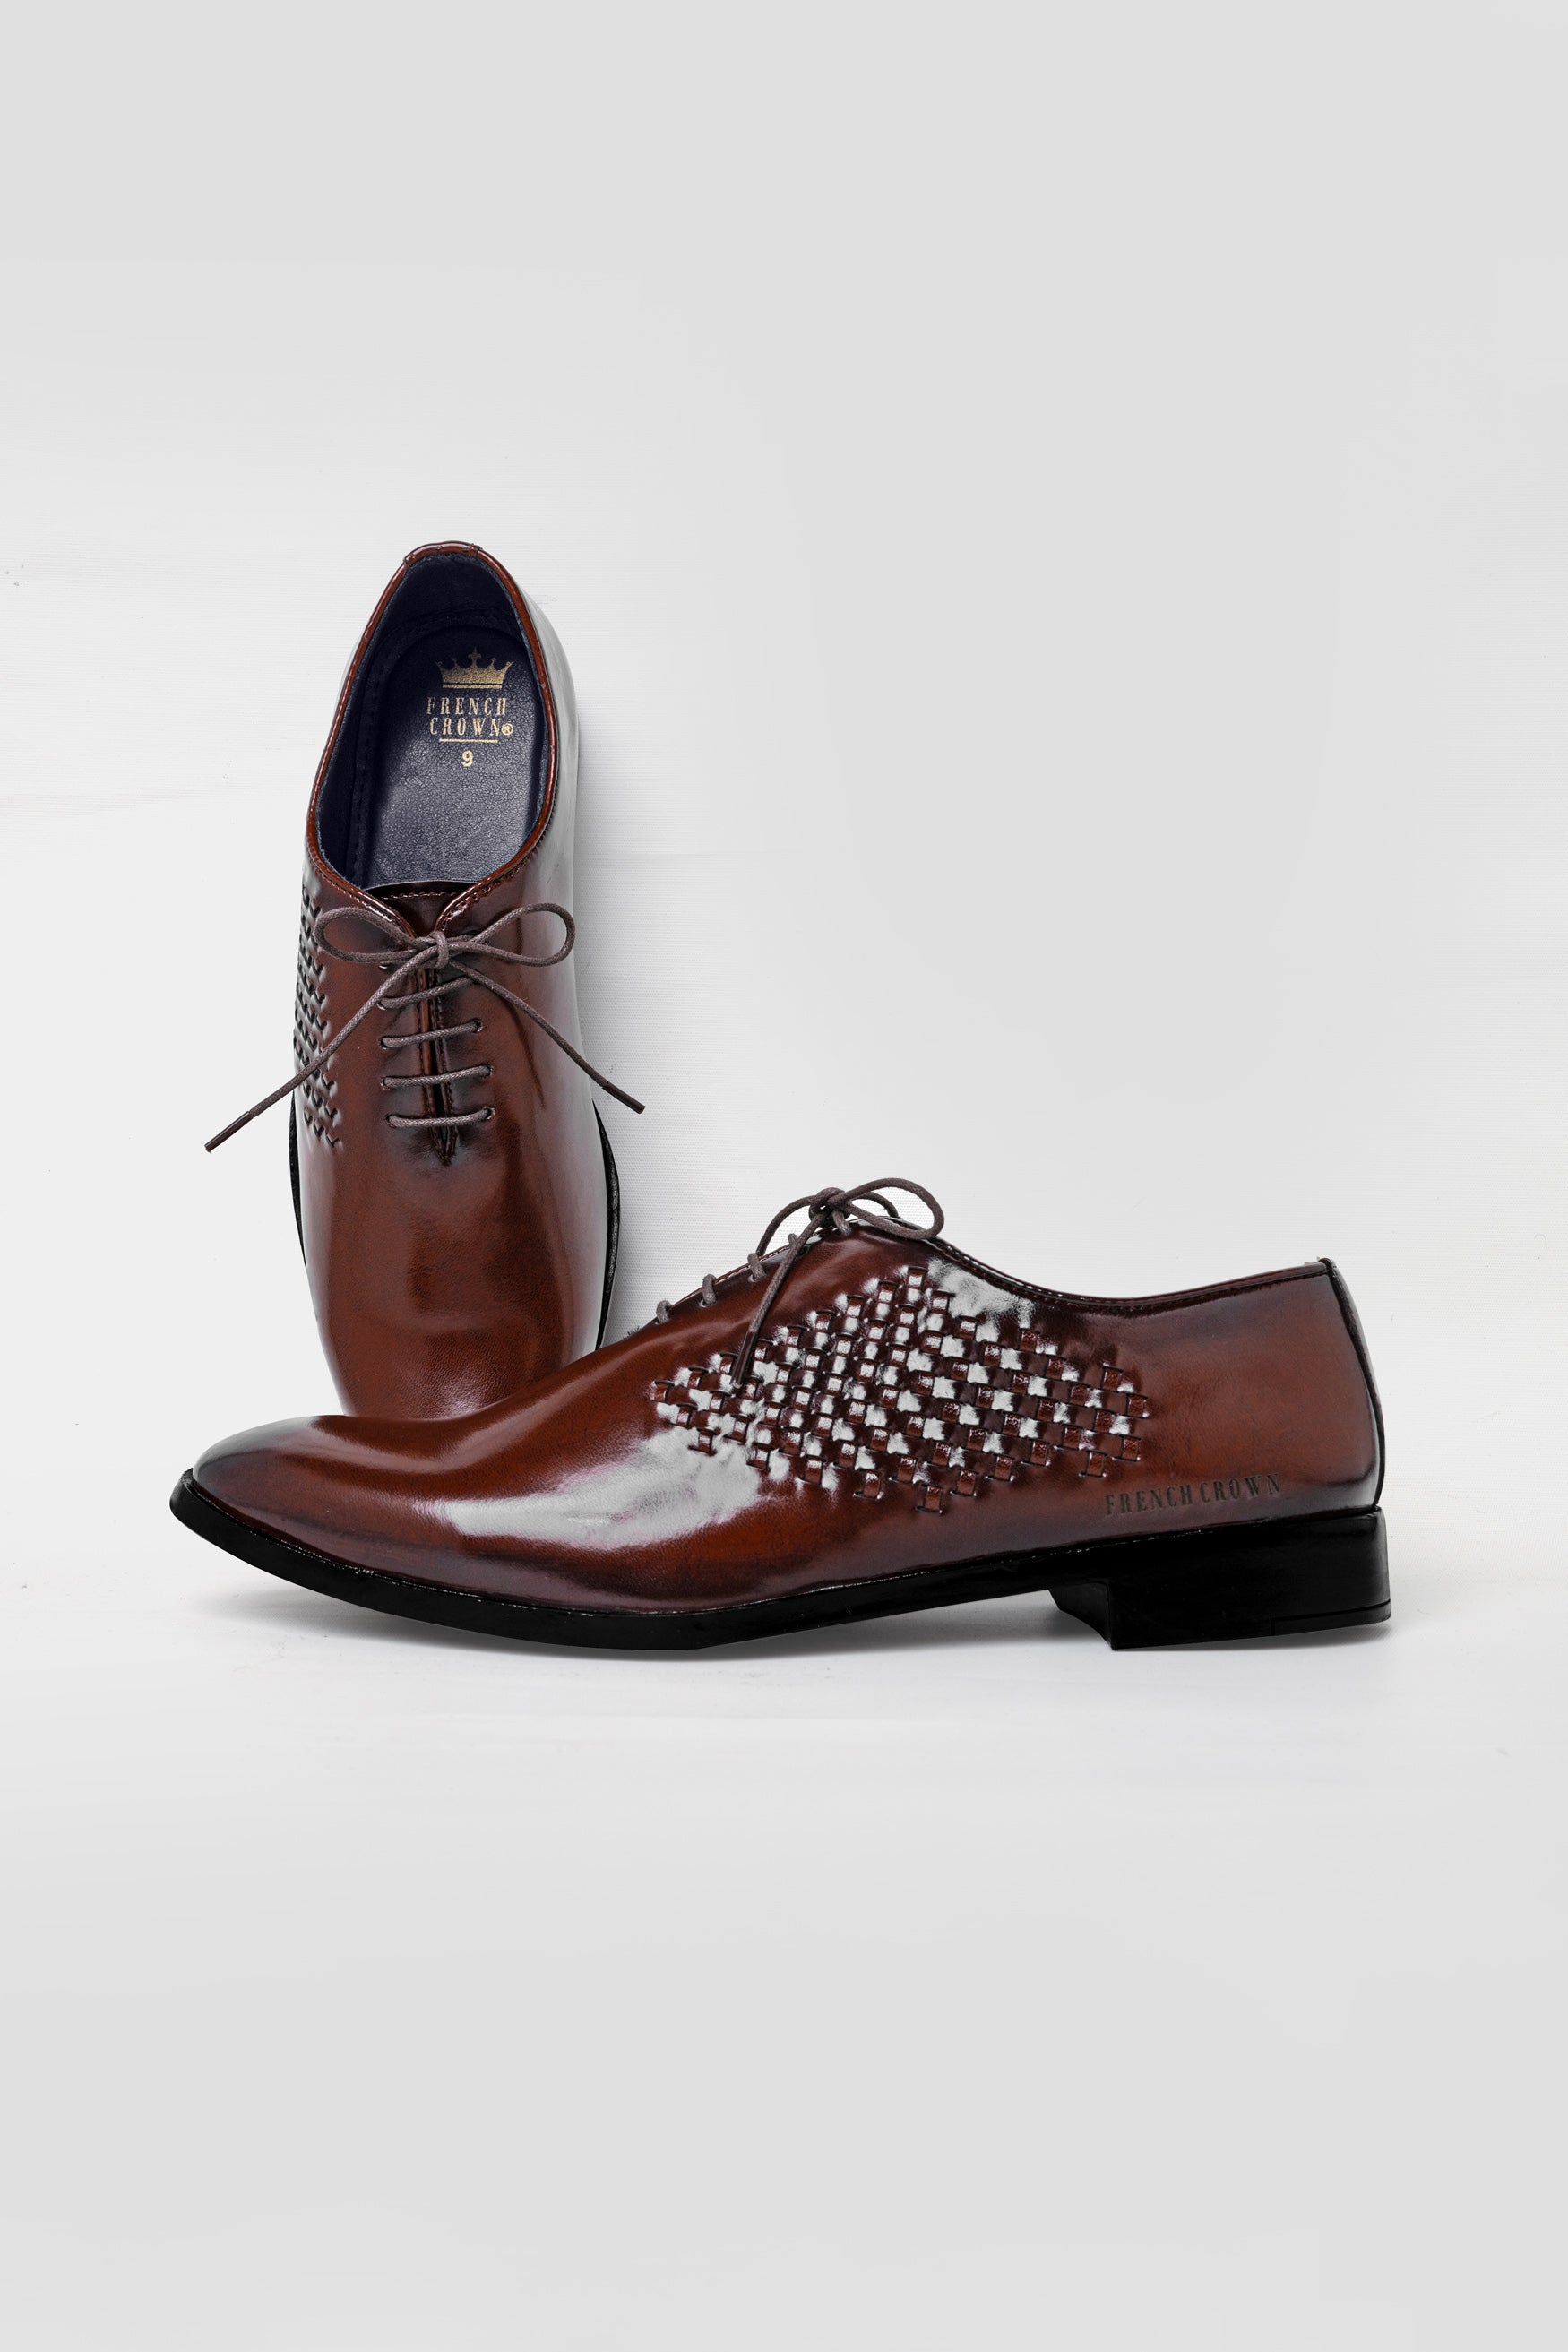 Brown Embossed Weave Vegan Leather Oxford Shoes